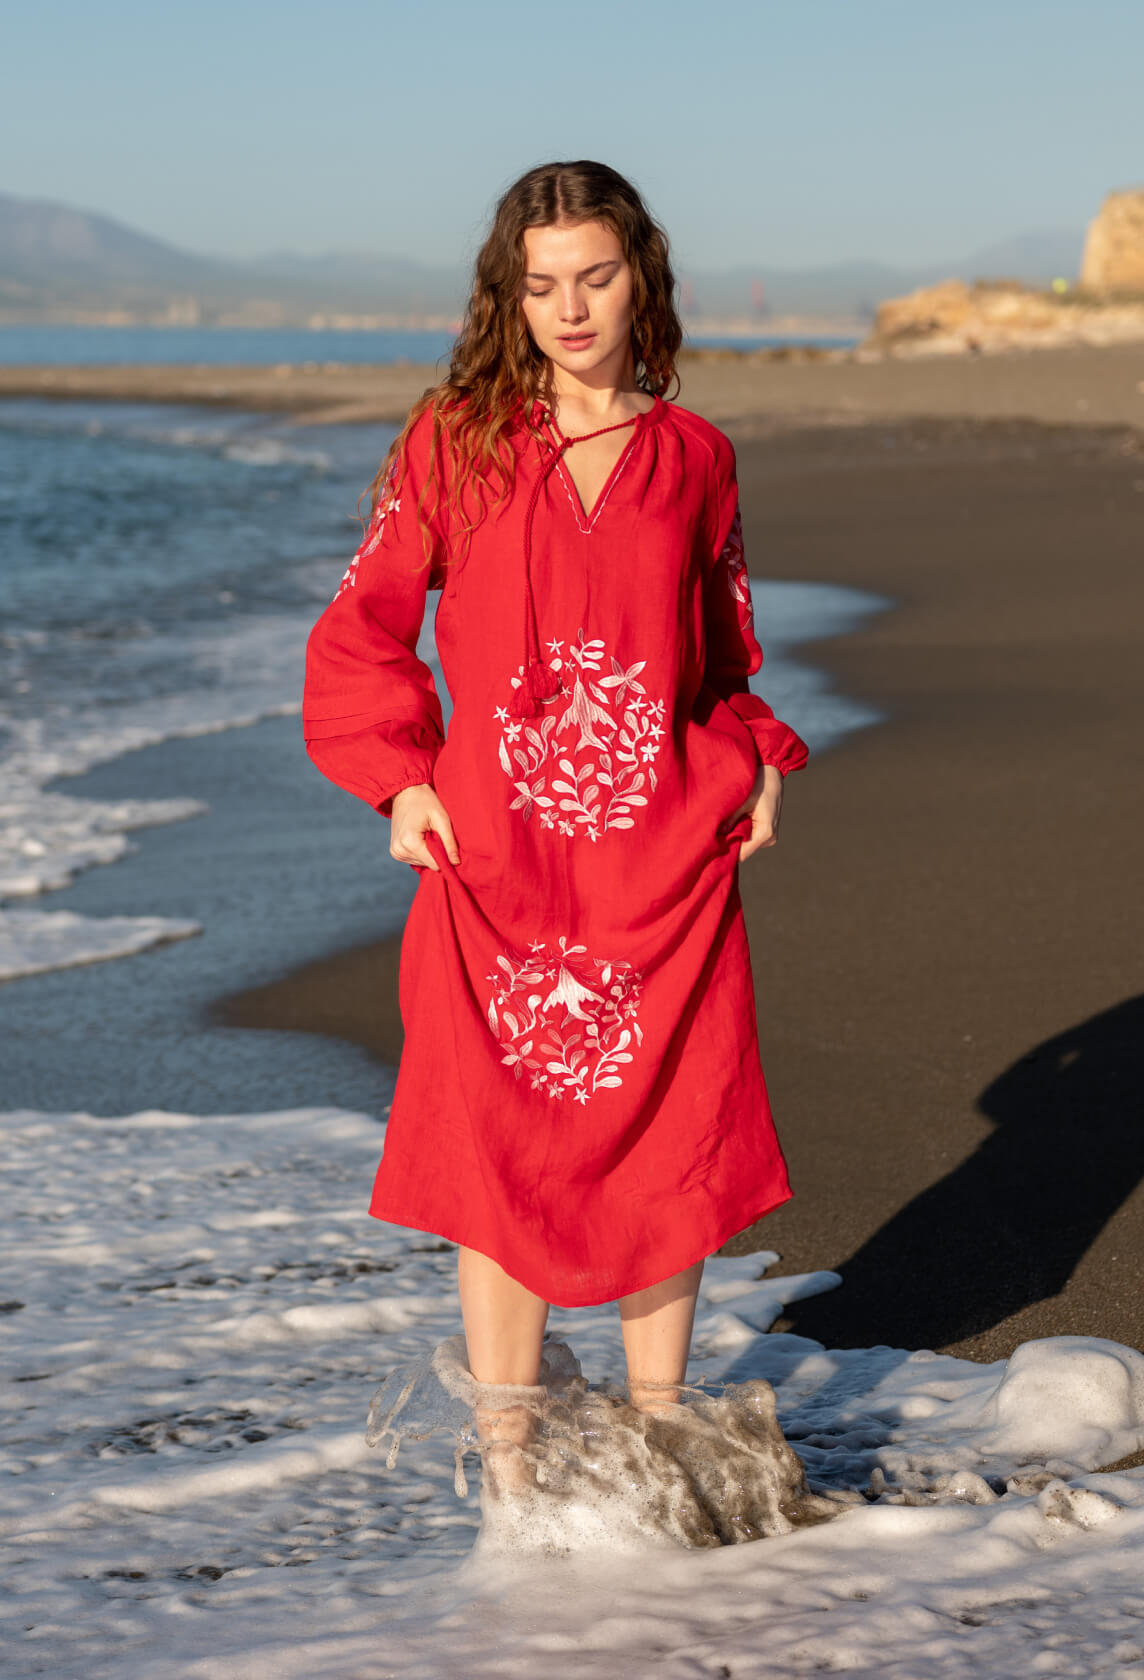 female wearing a red maxi dress with embroidery standing in the water on the beach